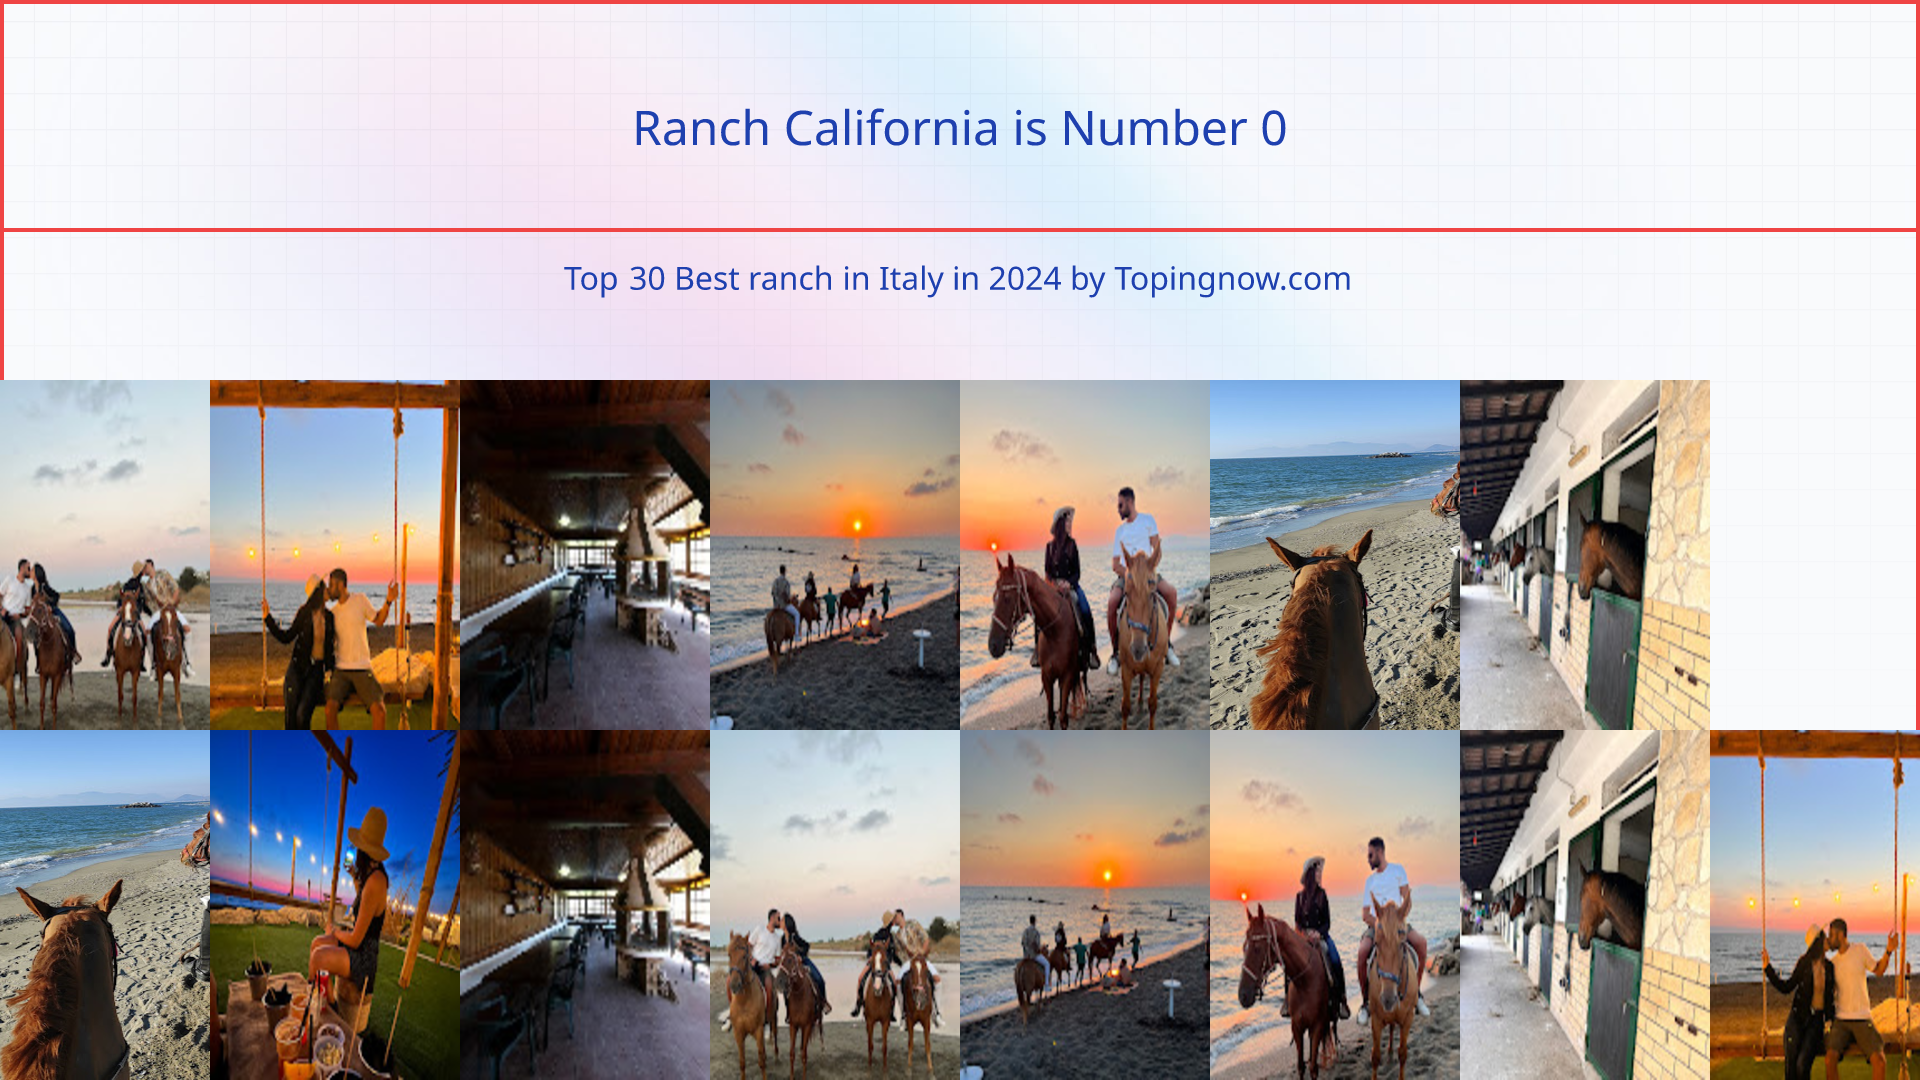 Ranch California: Top 30 Best ranch in Italy in 2024